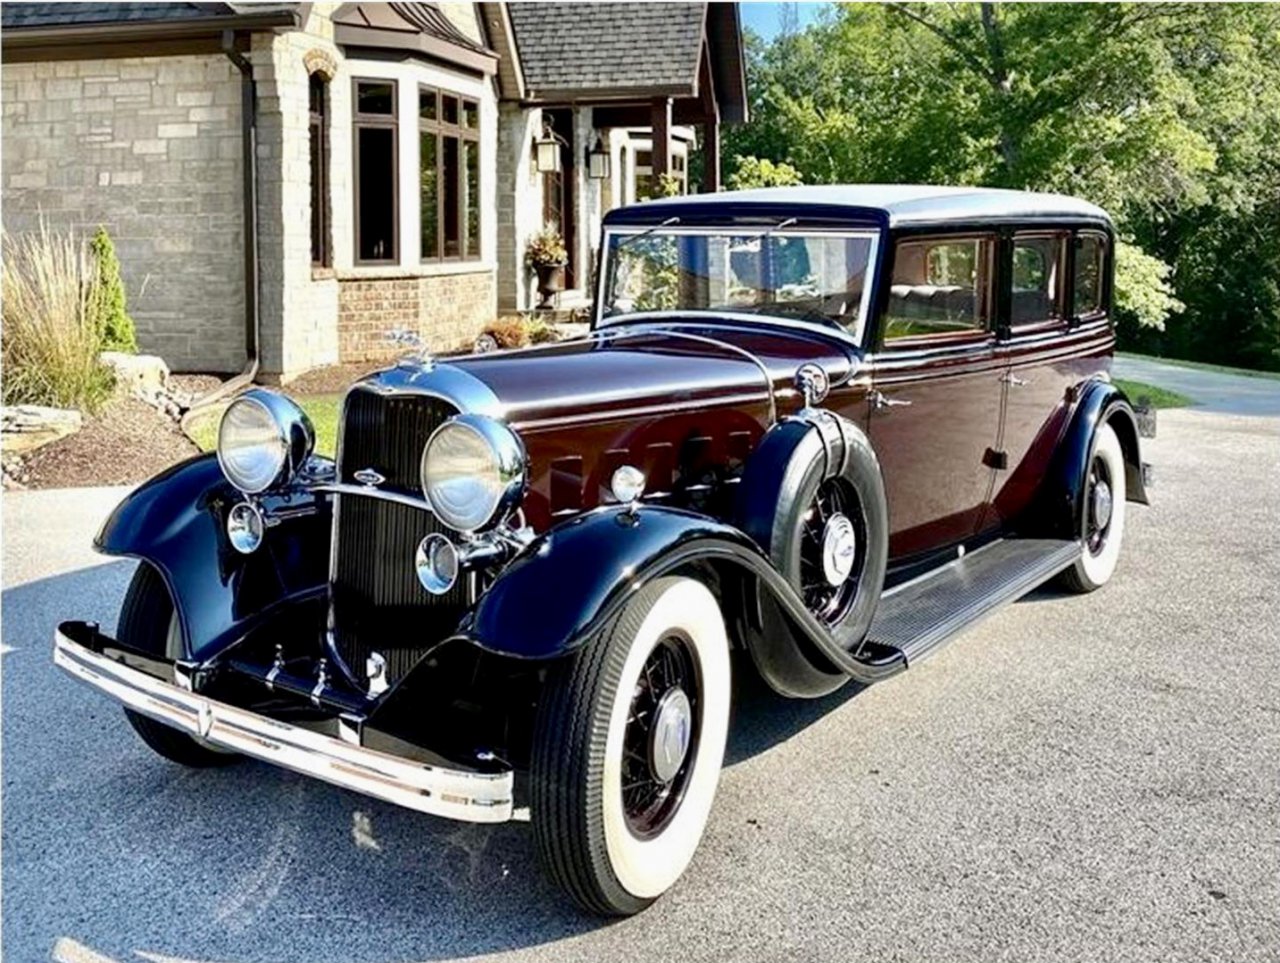 1932 Lincoln, Pick of the Day is a full classic: 1932 Lincoln KB, ClassicCars.com Journal